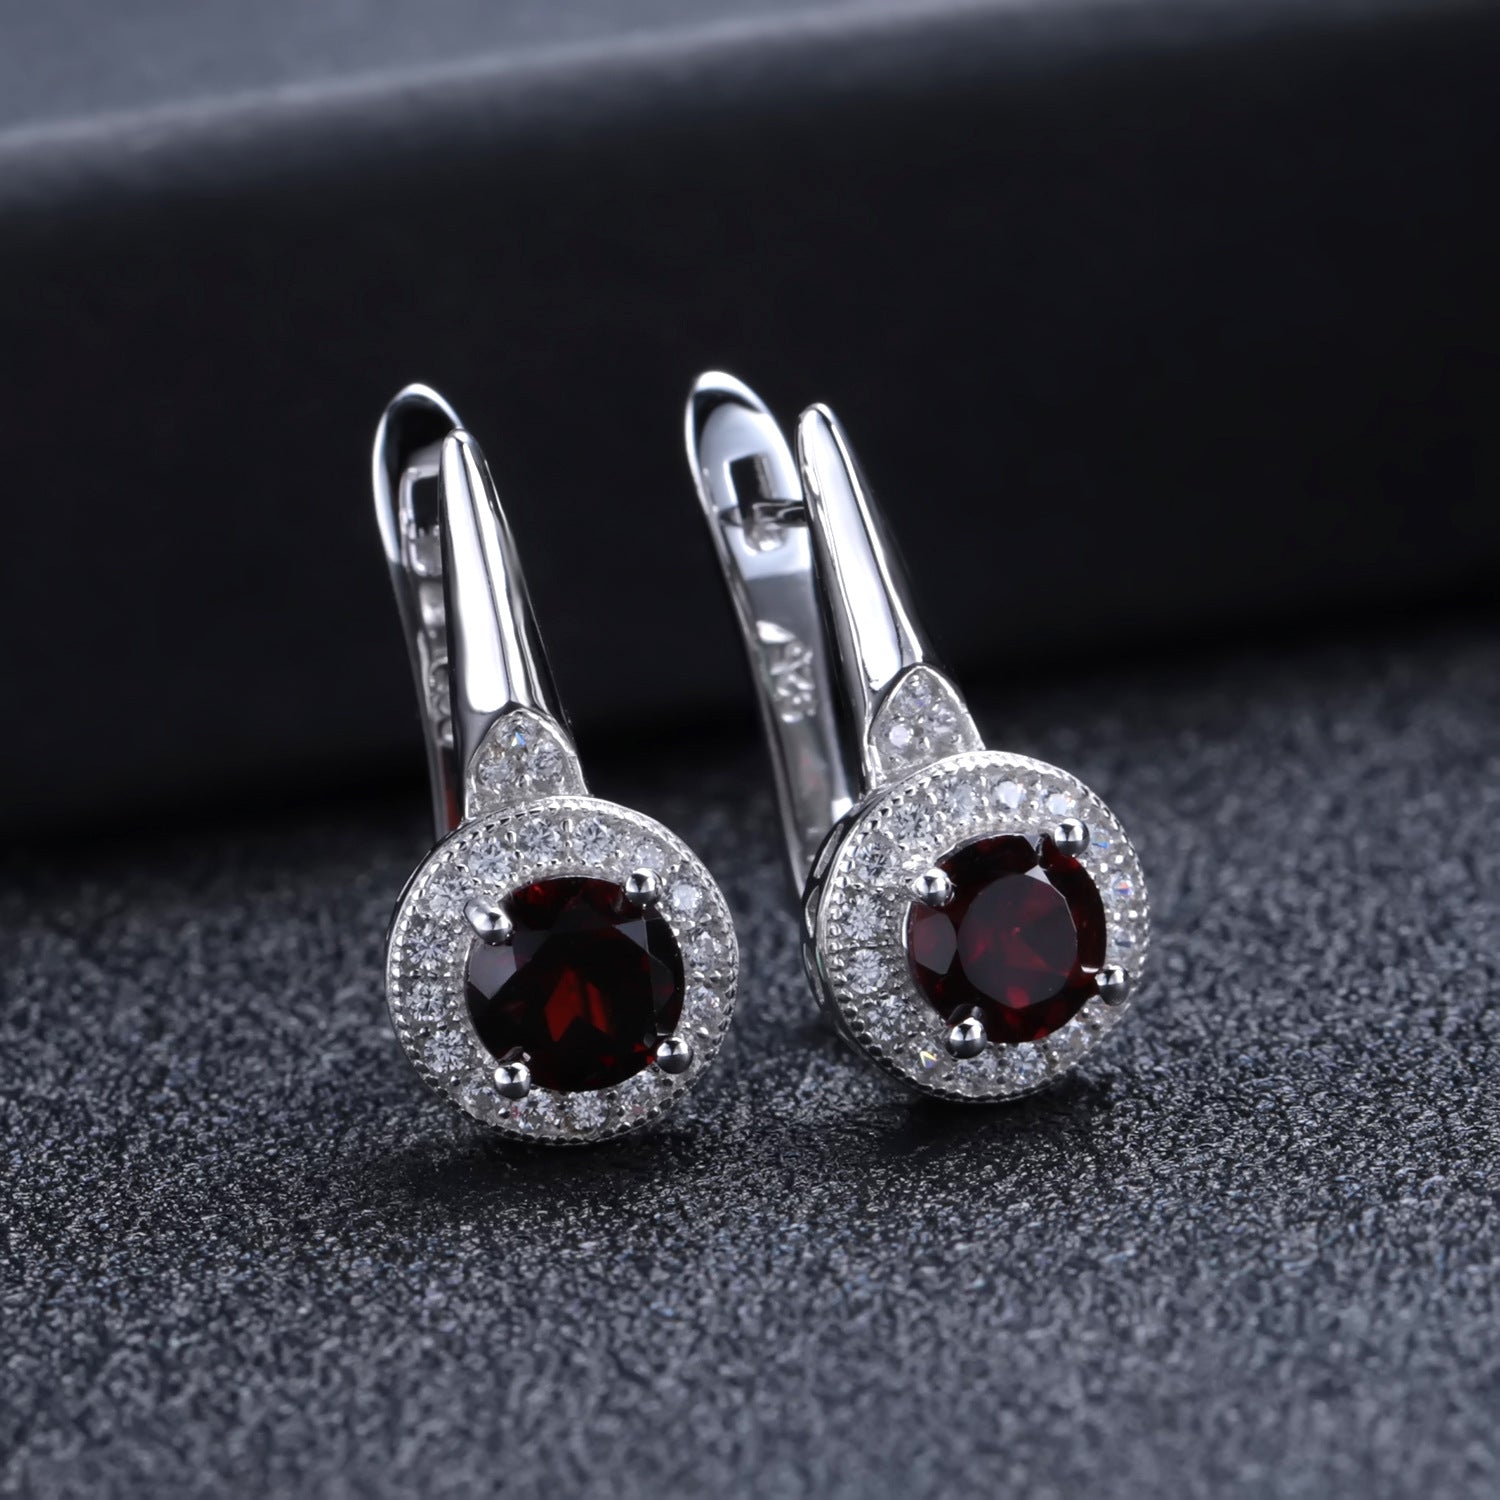 European Vintage Style Inaid Natural Garnet Soleste Halo Round Cut Silver Studs Earrings for Women